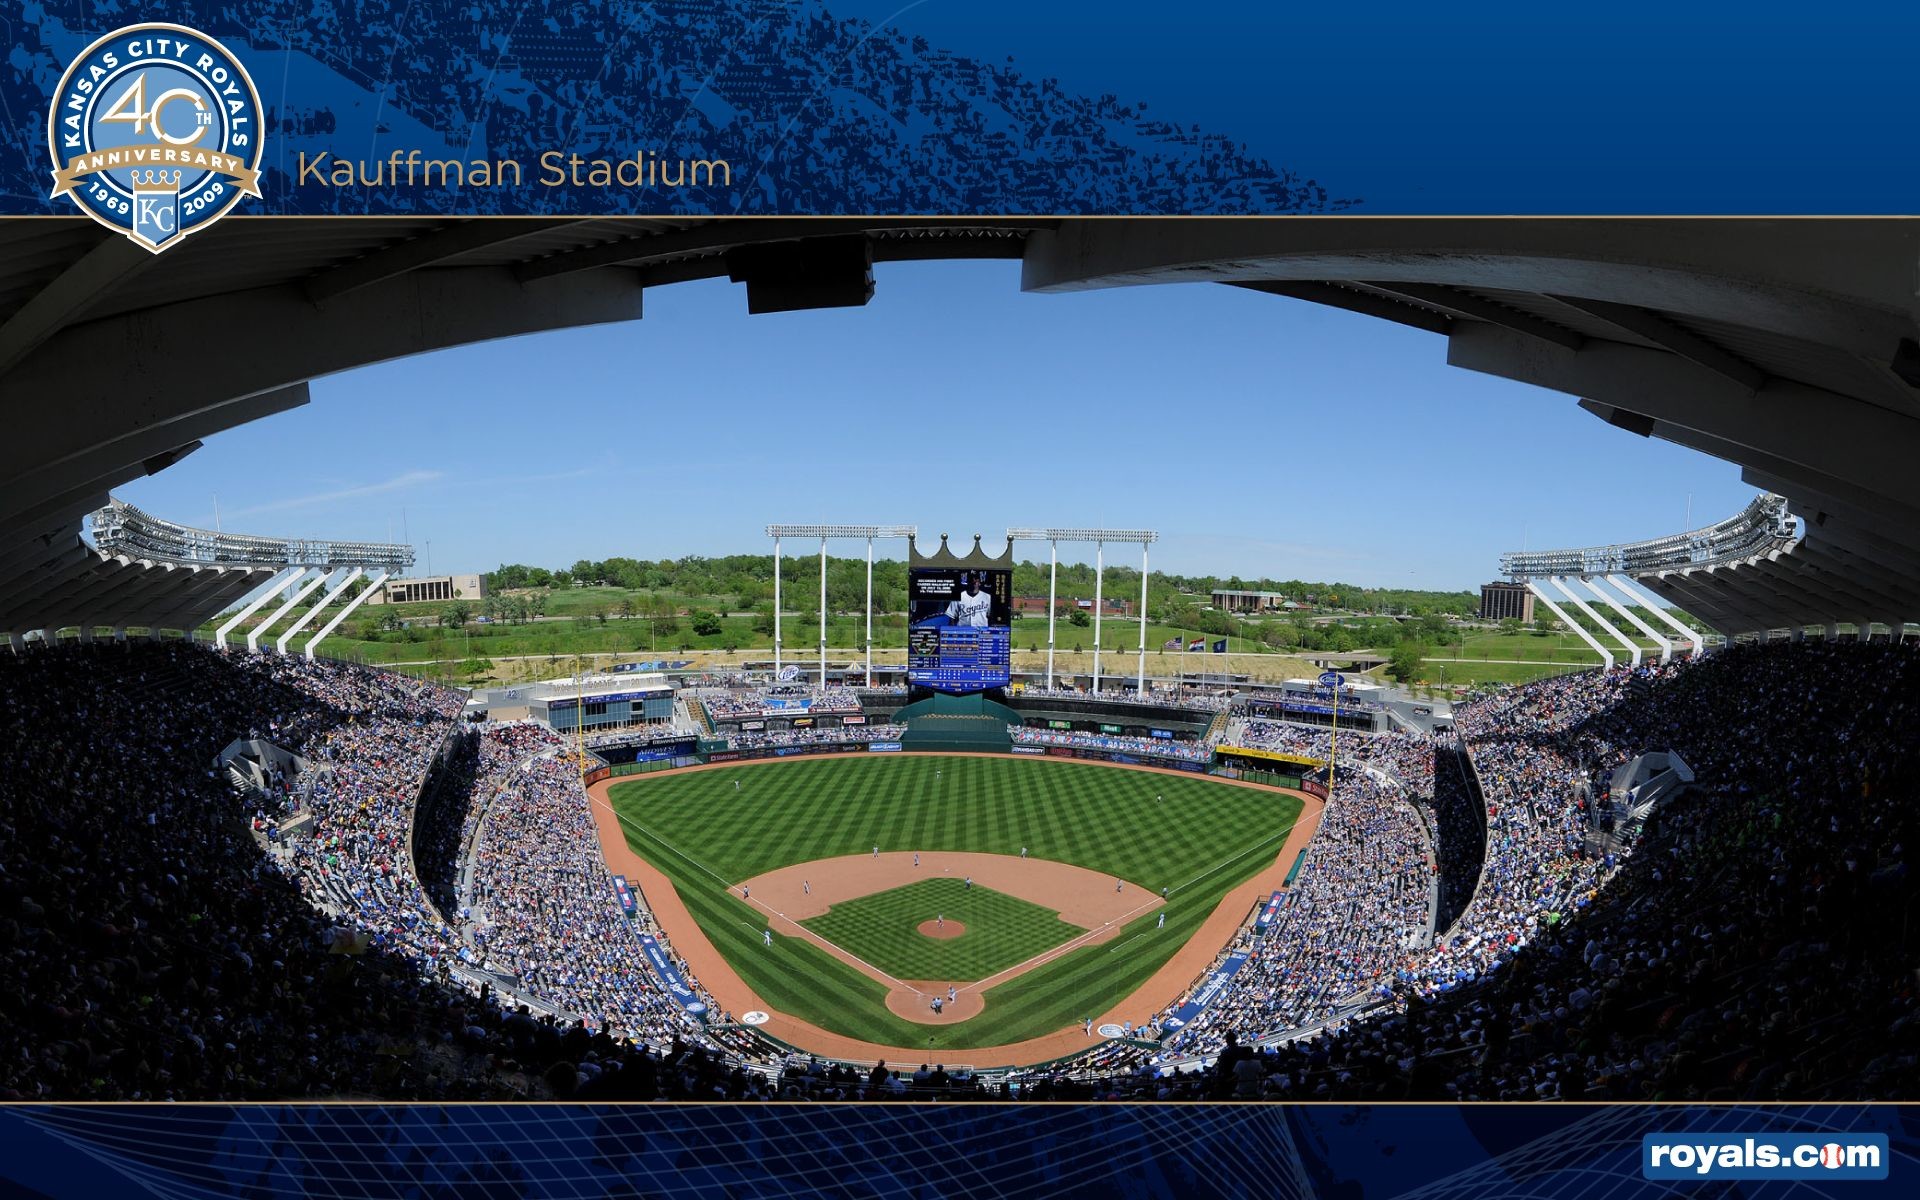 1920x1200 Kansas City Royals Wallpaper Pictures, High Quality | 30/05/2018